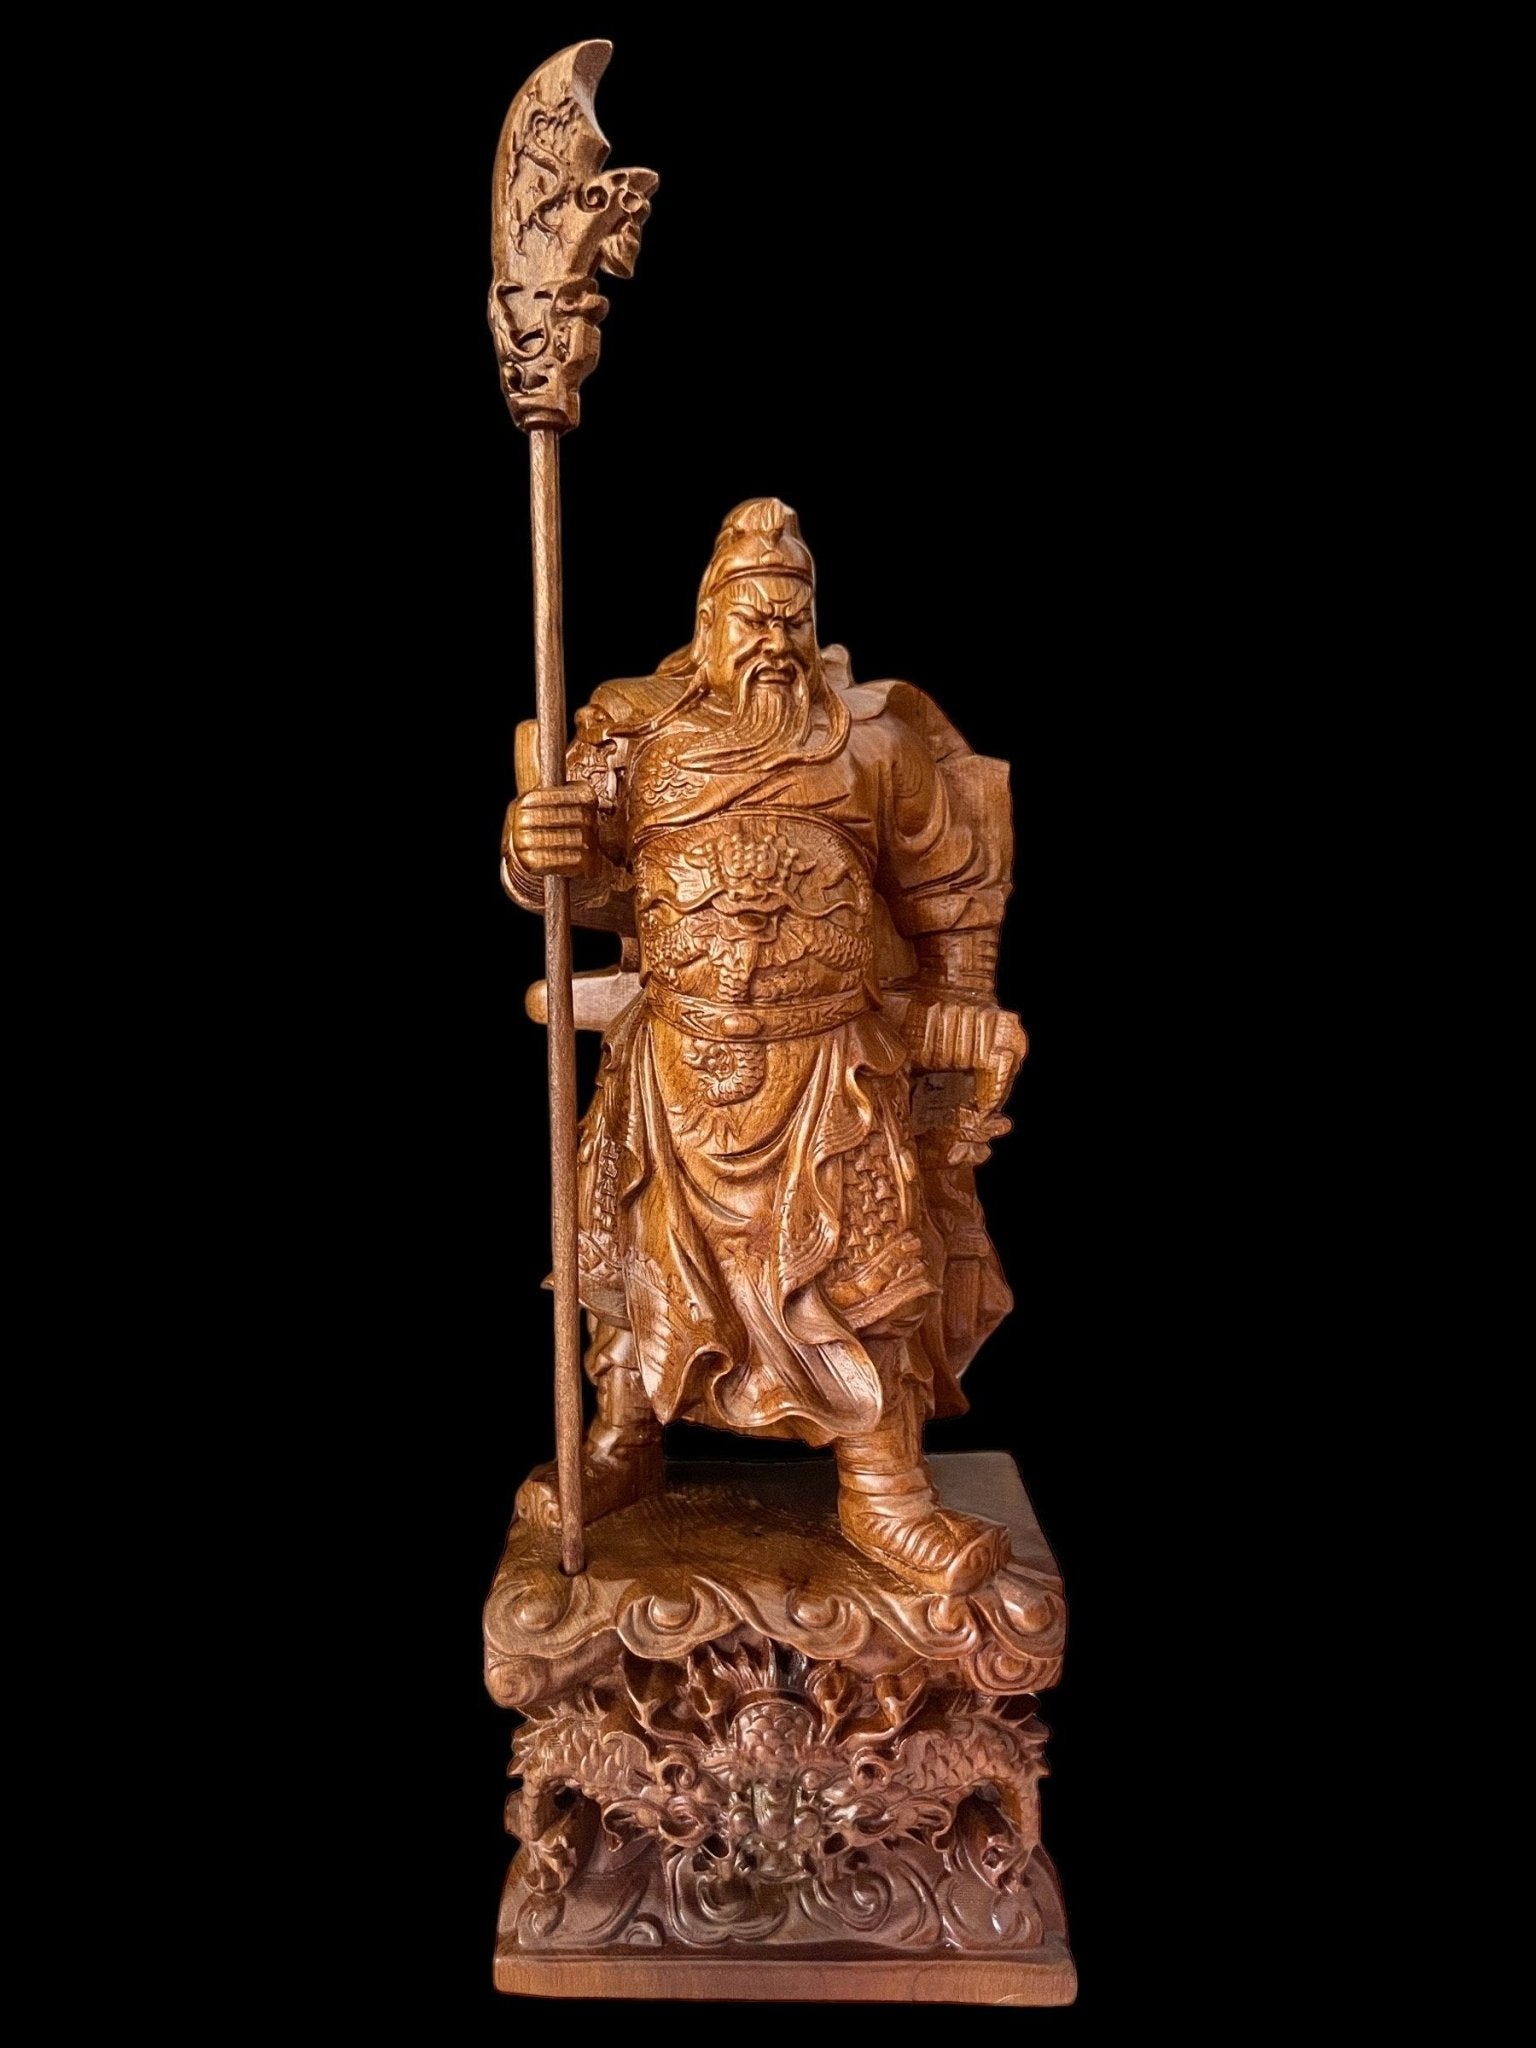 Guan Gong Guan Yu and Zhuge Liang Statue, Chinese Wooden Hand-Carved Civilian And Military Mandarin Statue, Quan Cong - Khong Minh FigurinesTuNaCraftCollection